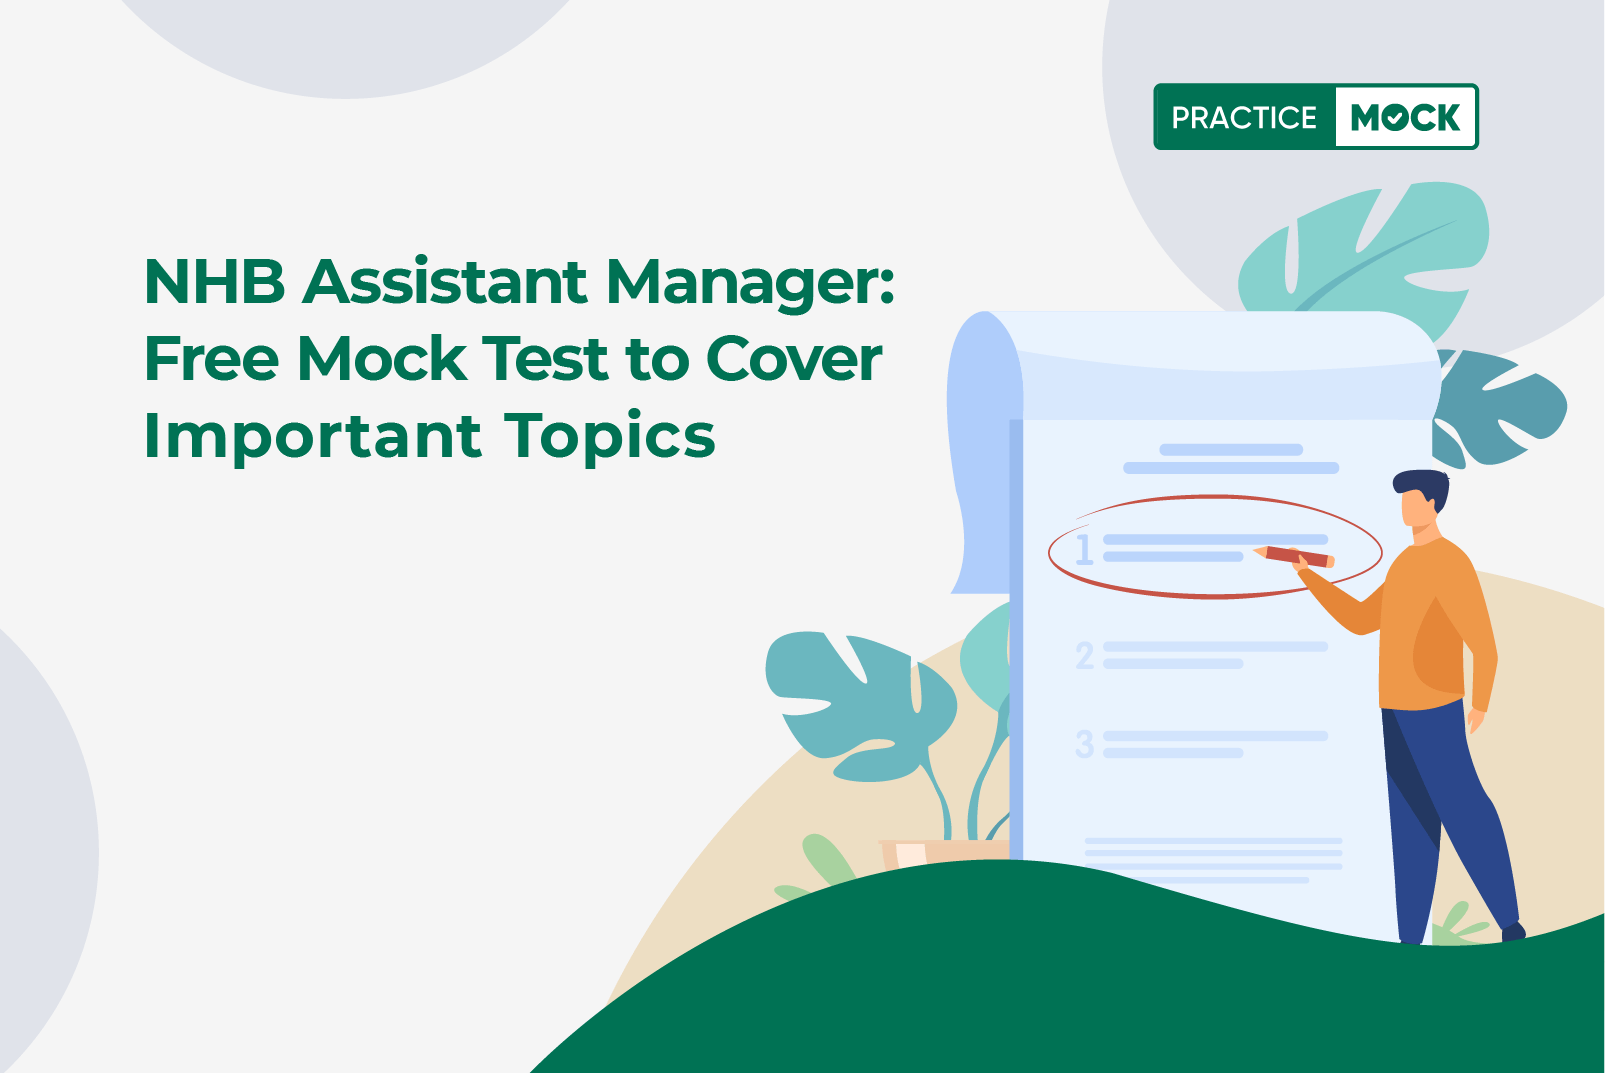 NHB Assistant Manager Free Mock Test to Cover Important Topics